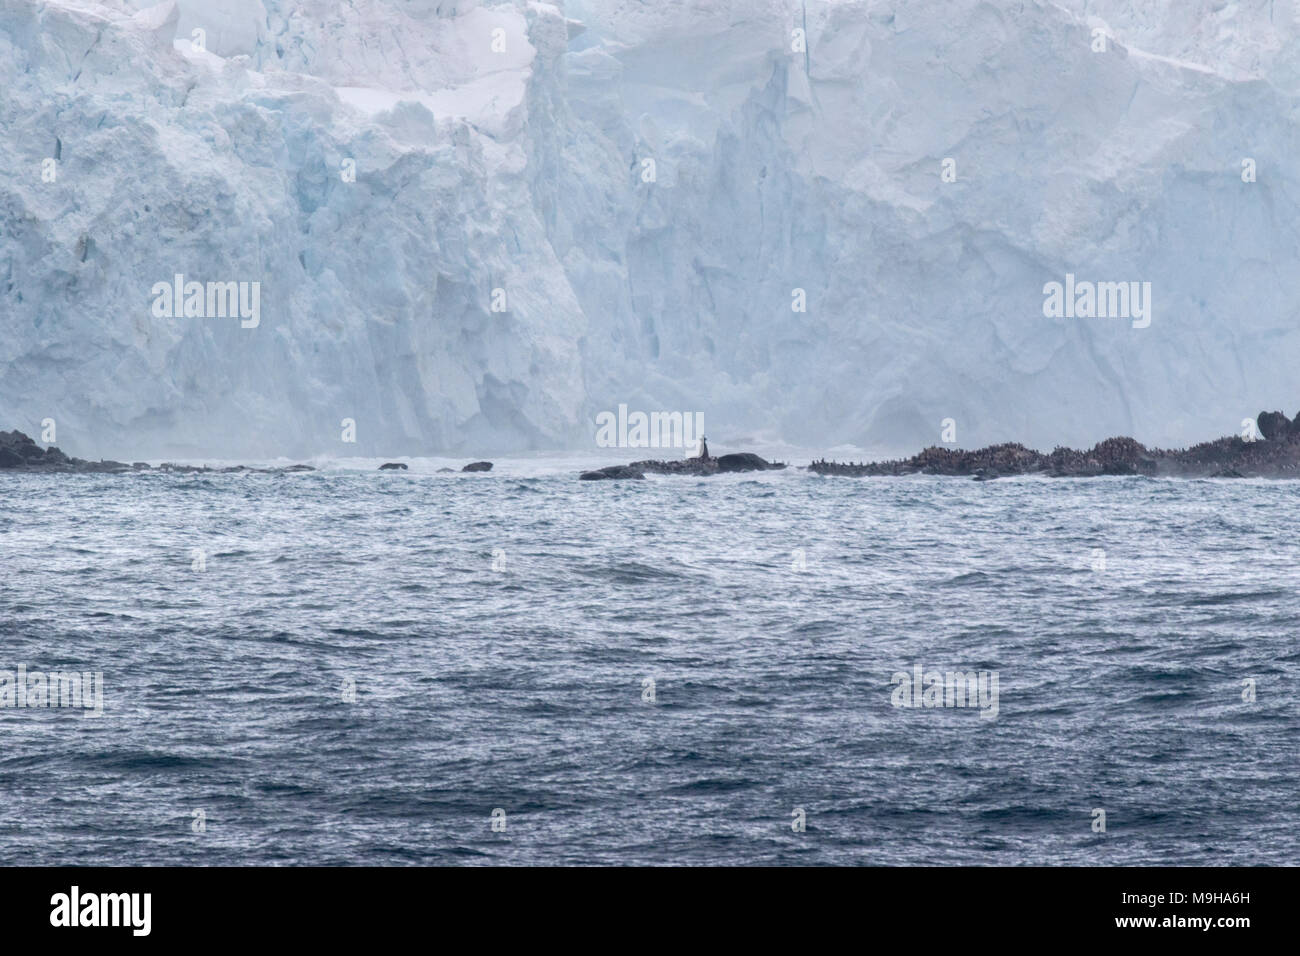 view of Point Wild, Elephant Island, Antarctica, showing memorial to Yelcho, site of Ernest Shackleton Endurance rescue Photo - Alamy